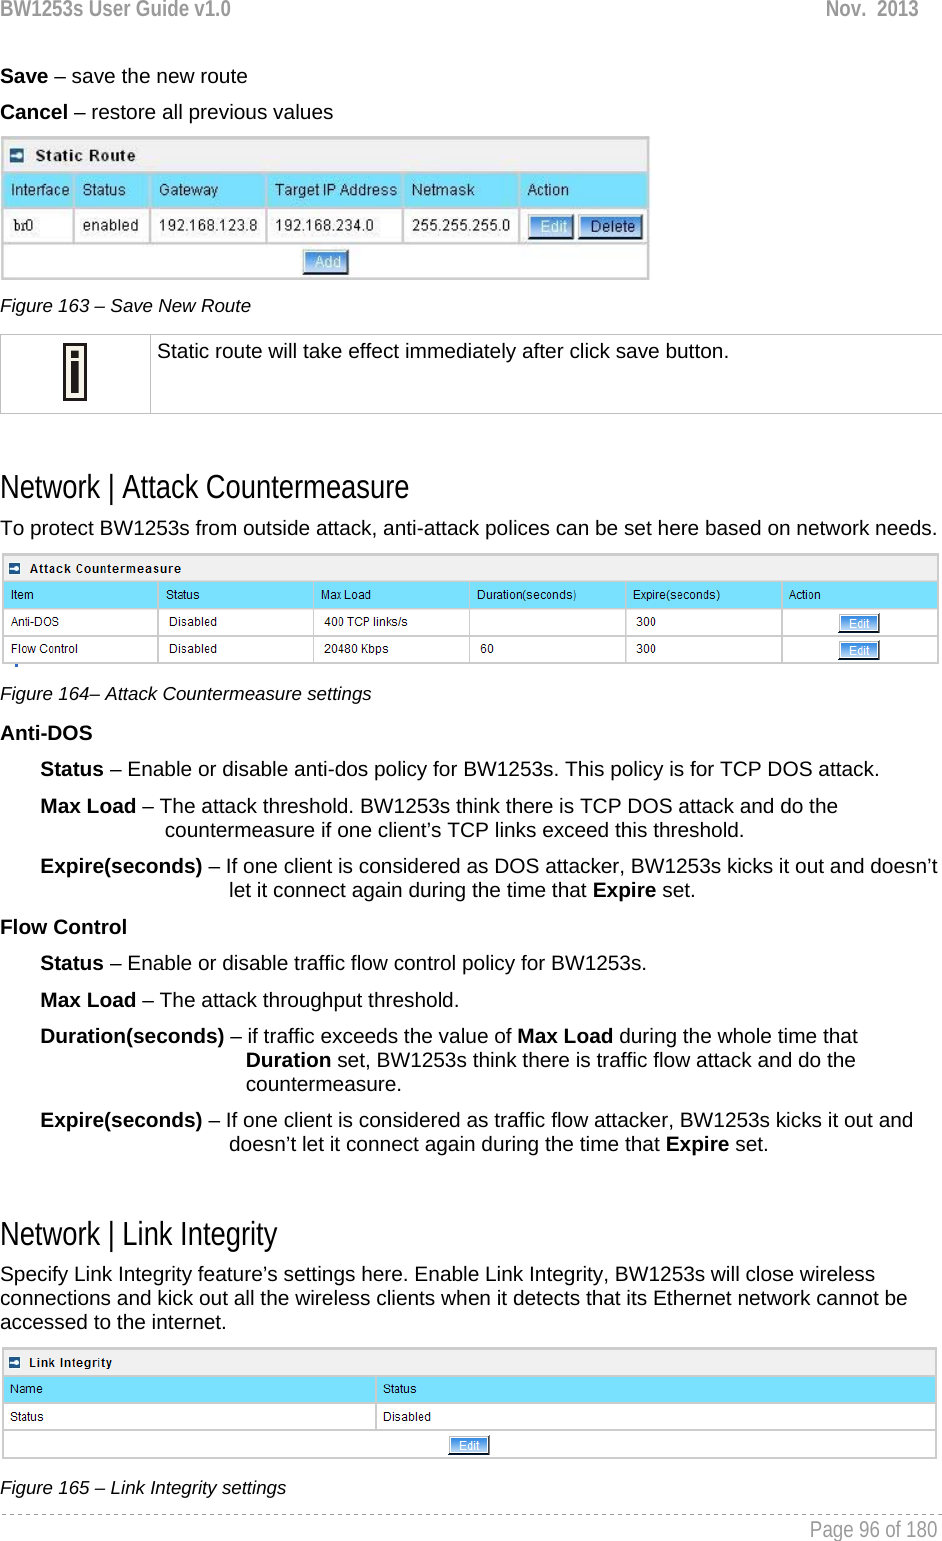 BW1253s User Guide v1.0  Nov.  2013     Page 96 of 180   Save – save the new route Cancel – restore all previous values  Figure 163 – Save New Route  Static route will take effect immediately after click save button.  Network | Attack Countermeasure To protect BW1253s from outside attack, anti-attack polices can be set here based on network needs.   Figure 164– Attack Countermeasure settings Anti-DOS         Status – Enable or disable anti-dos policy for BW1253s. This policy is for TCP DOS attack.        Max Load – The attack threshold. BW1253s think there is TCP DOS attack and do the             countermeasure if one client’s TCP links exceed this threshold.         Expire(seconds) – If one client is considered as DOS attacker, BW1253s kicks it out and doesn’t let it connect again during the time that Expire set.  Flow Control         Status – Enable or disable traffic flow control policy for BW1253s.         Max Load – The attack throughput threshold.         Duration(seconds) – if traffic exceeds the value of Max Load during the whole time that                      Duration set, BW1253s think there is traffic flow attack and do the                      countermeasure.        Expire(seconds) – If one client is considered as traffic flow attacker, BW1253s kicks it out and doesn’t let it connect again during the time that Expire set.   Network | Link Integrity Specify Link Integrity feature’s settings here. Enable Link Integrity, BW1253s will close wireless connections and kick out all the wireless clients when it detects that its Ethernet network cannot be accessed to the internet.  Figure 165 – Link Integrity settings 